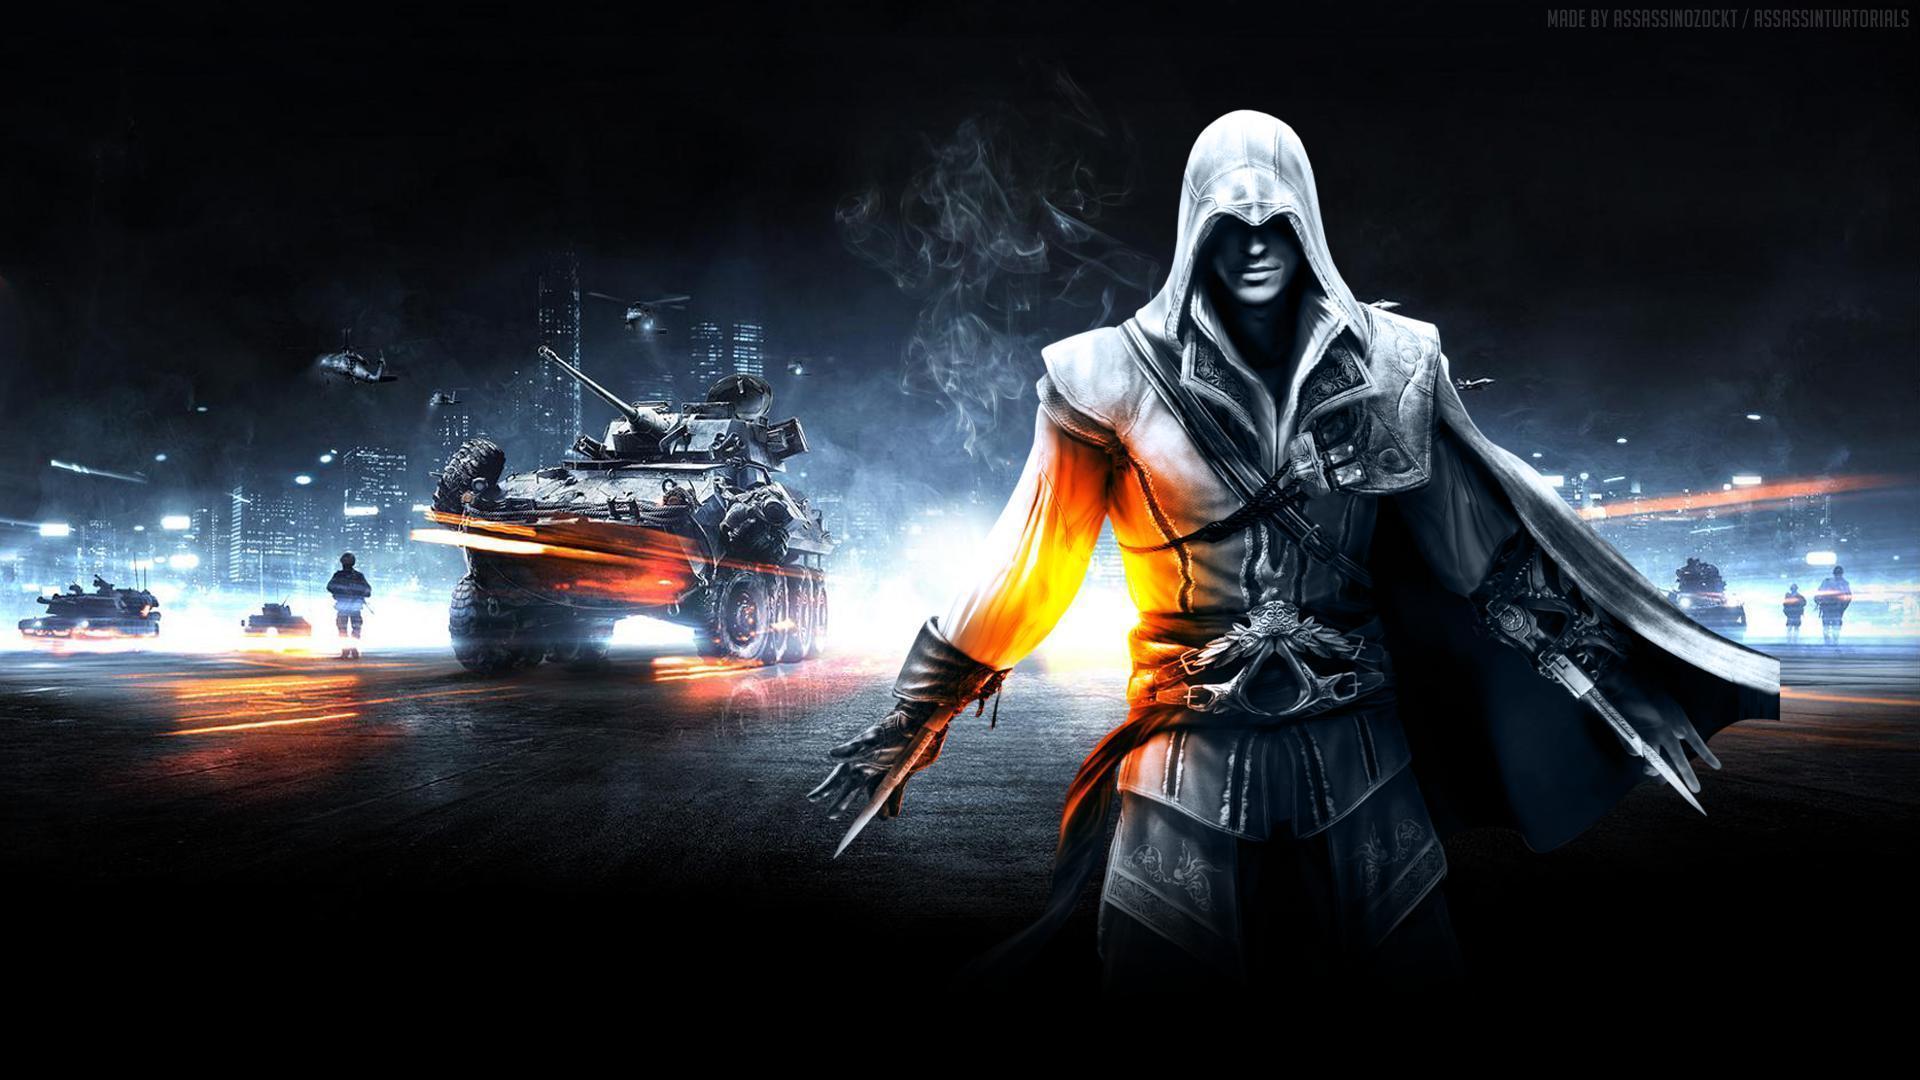 Game Wallpapers 1366x768 (74+ images)